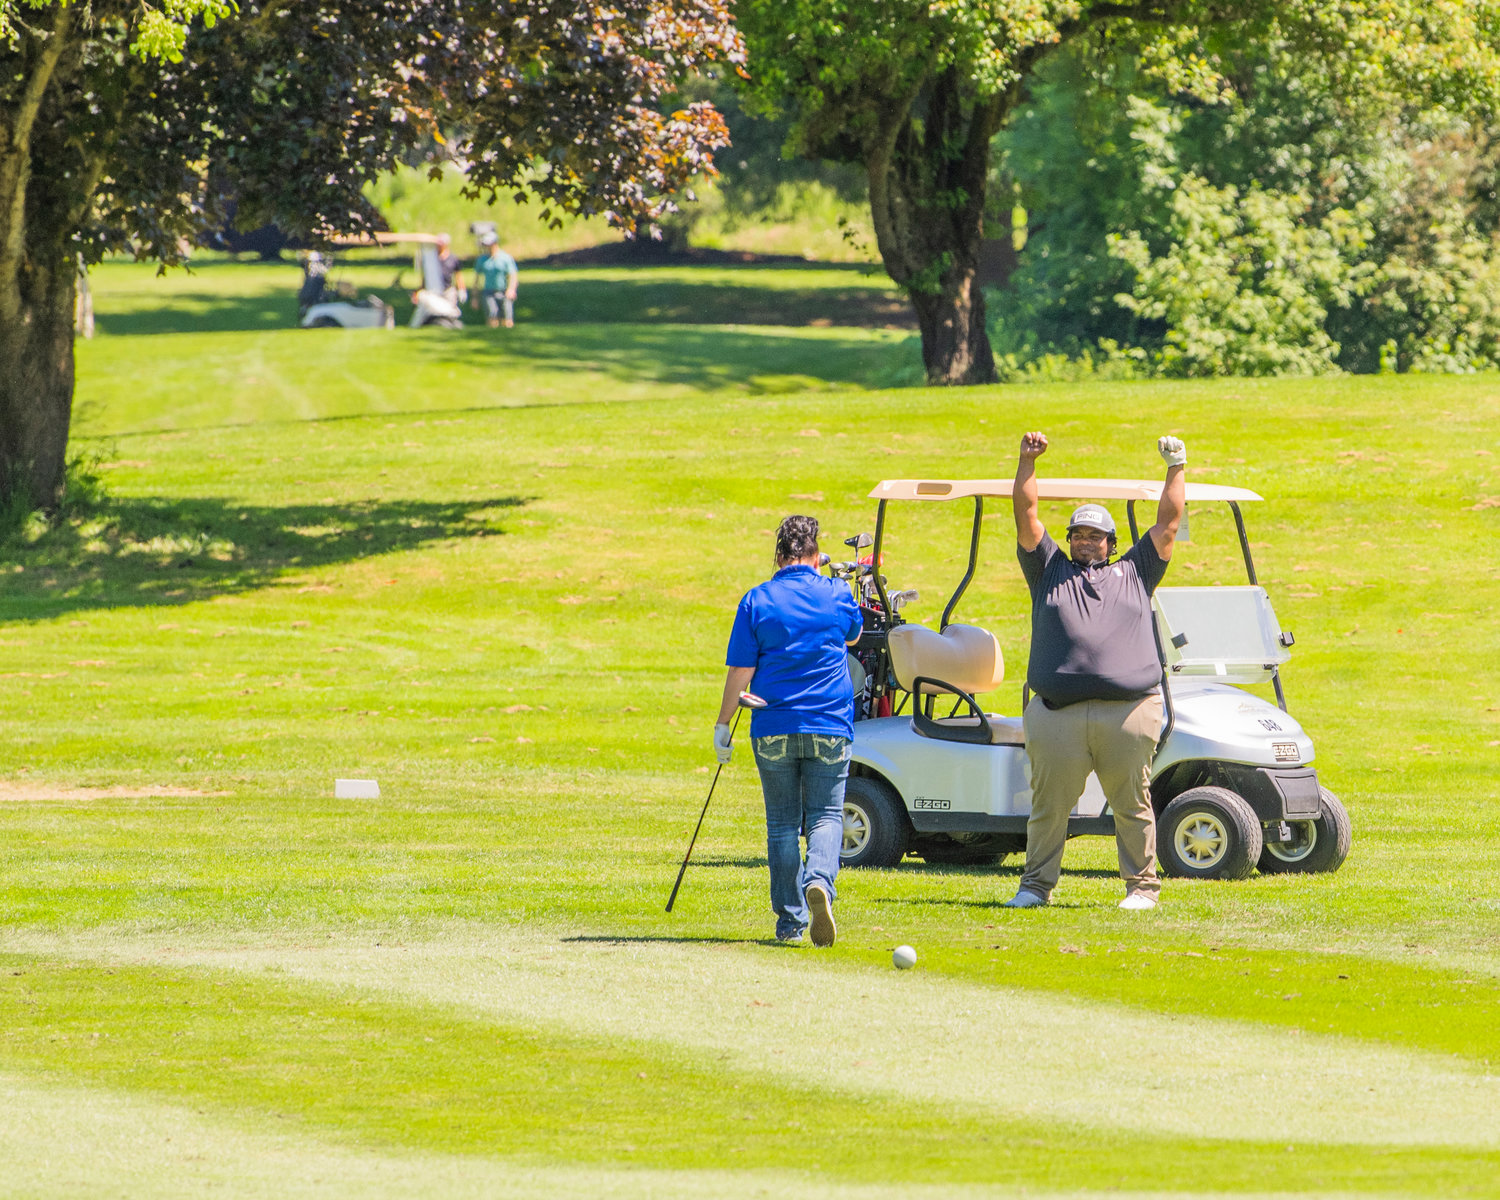 Chris Scieneaux cheers after Eddi Nelson tees off in the right directionFriday during a charity torunament at riverside Golf Course in Chehalis.